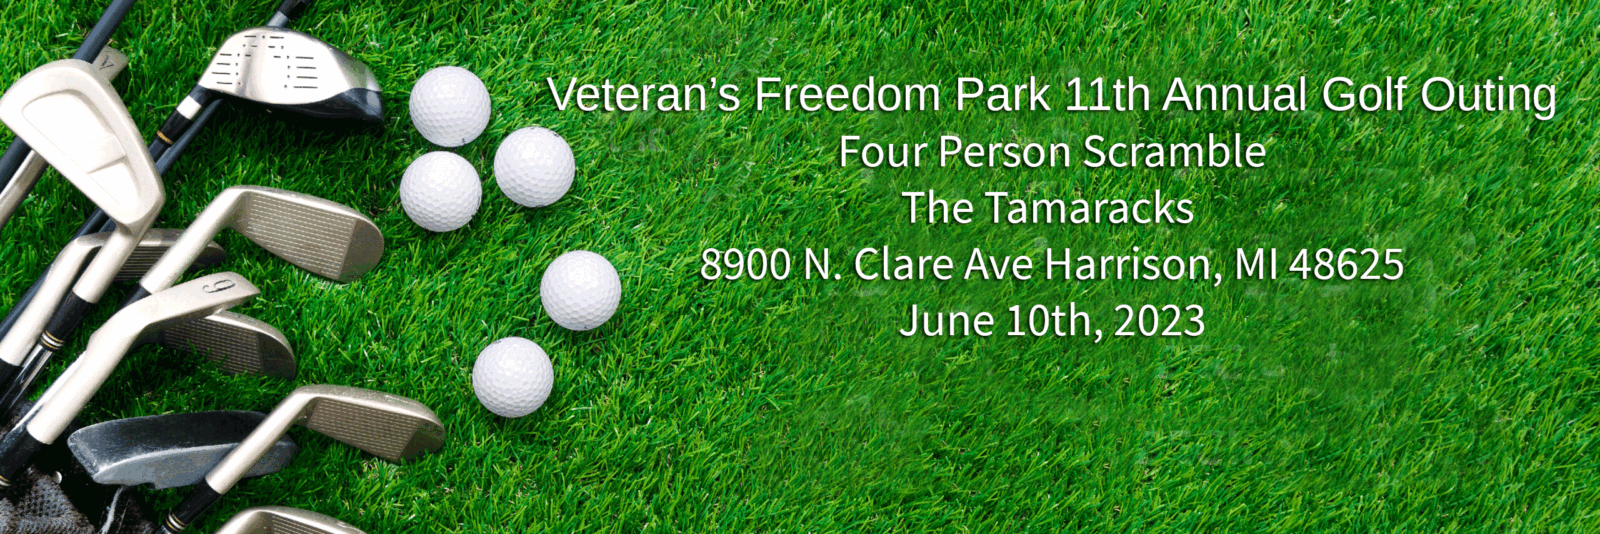 Veteran’s Freedom Park 11th Annual Golf Outing